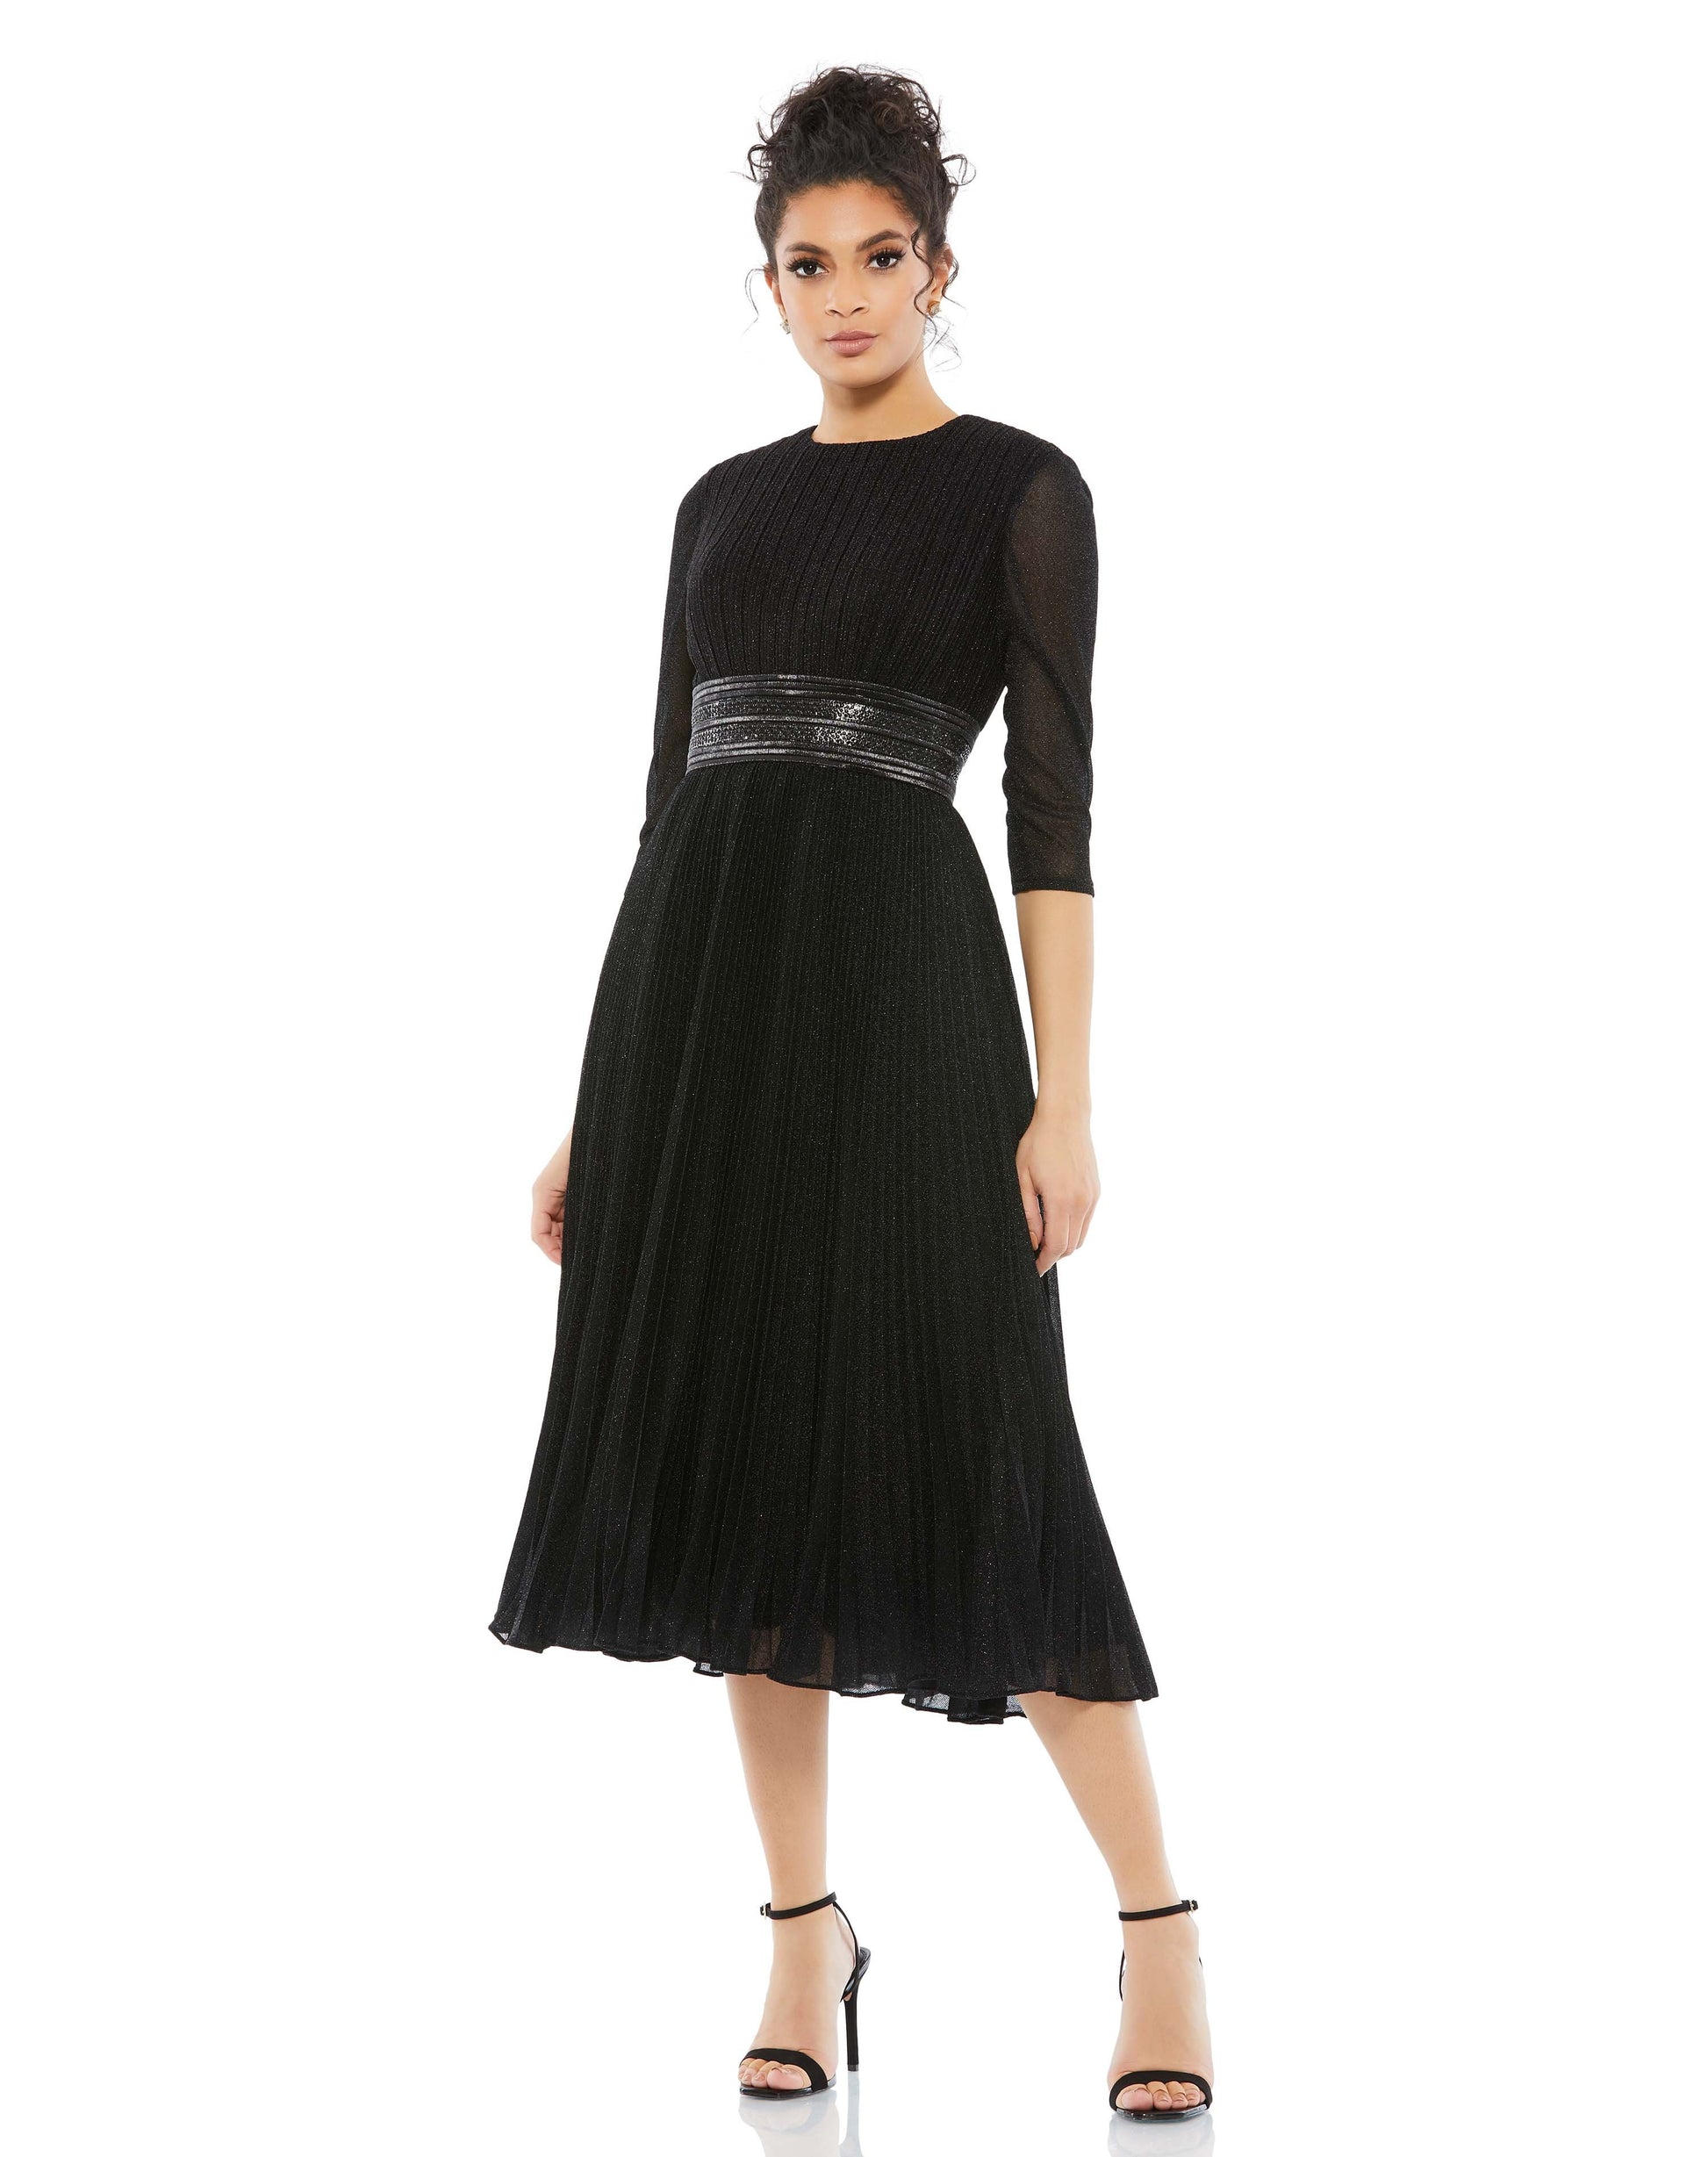 Elegant 3/4 sleeve dress with an a-line pleated tea-length skirt, round neckline, and a dramatic embellished waistband. Mac Duggal Fully Lined 100% Polyester High Neck 3/4 Sleeve Midi Length Style #30750